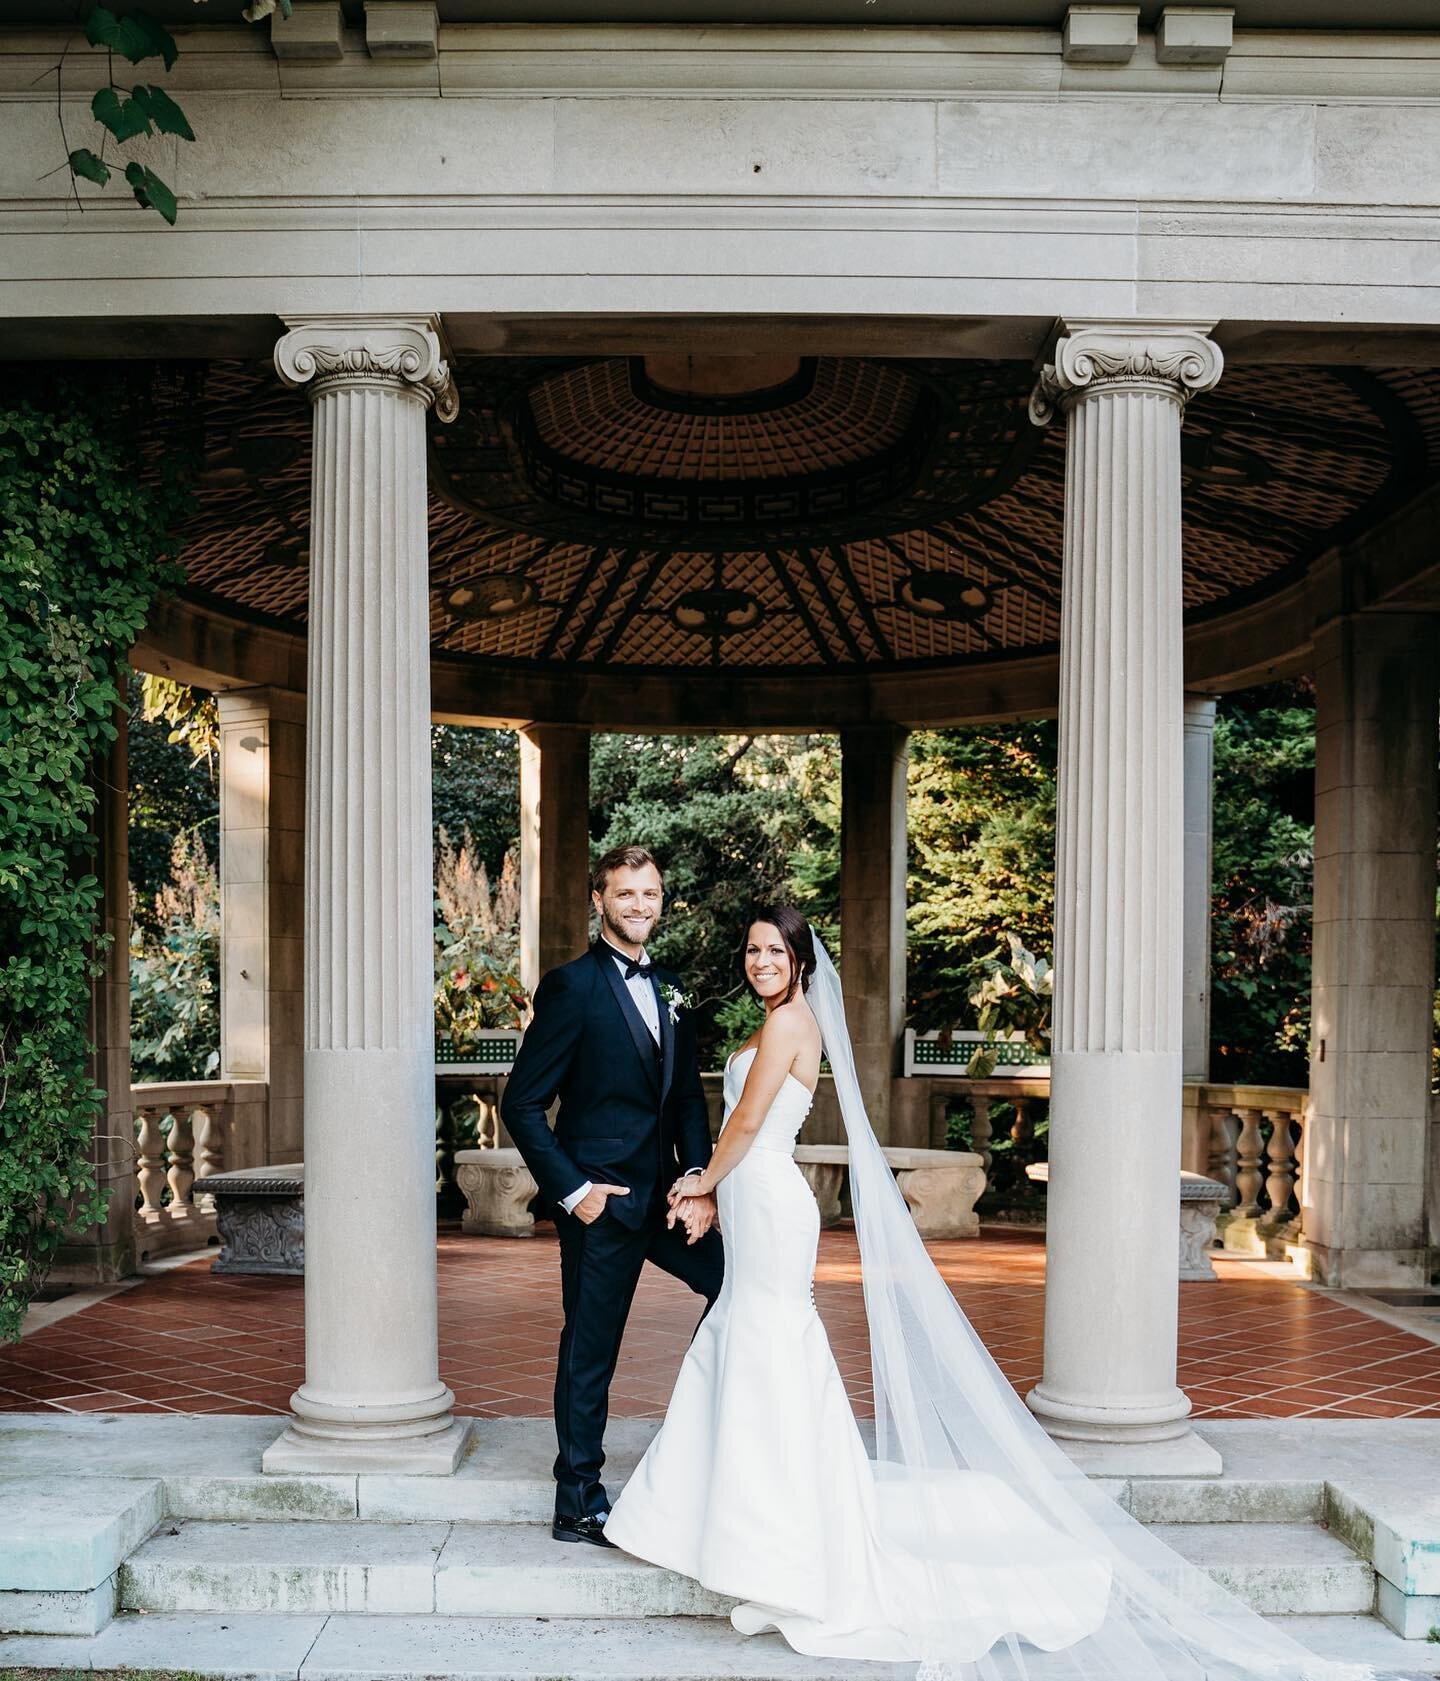 I&rsquo;ll never stop posting this show stopping wedding from Eolia Mansion this past September. Narrowing down which photos to post will forever be a challenge, so let&rsquo;s go with just a few of the Bride &amp; Groom right after the first look wi